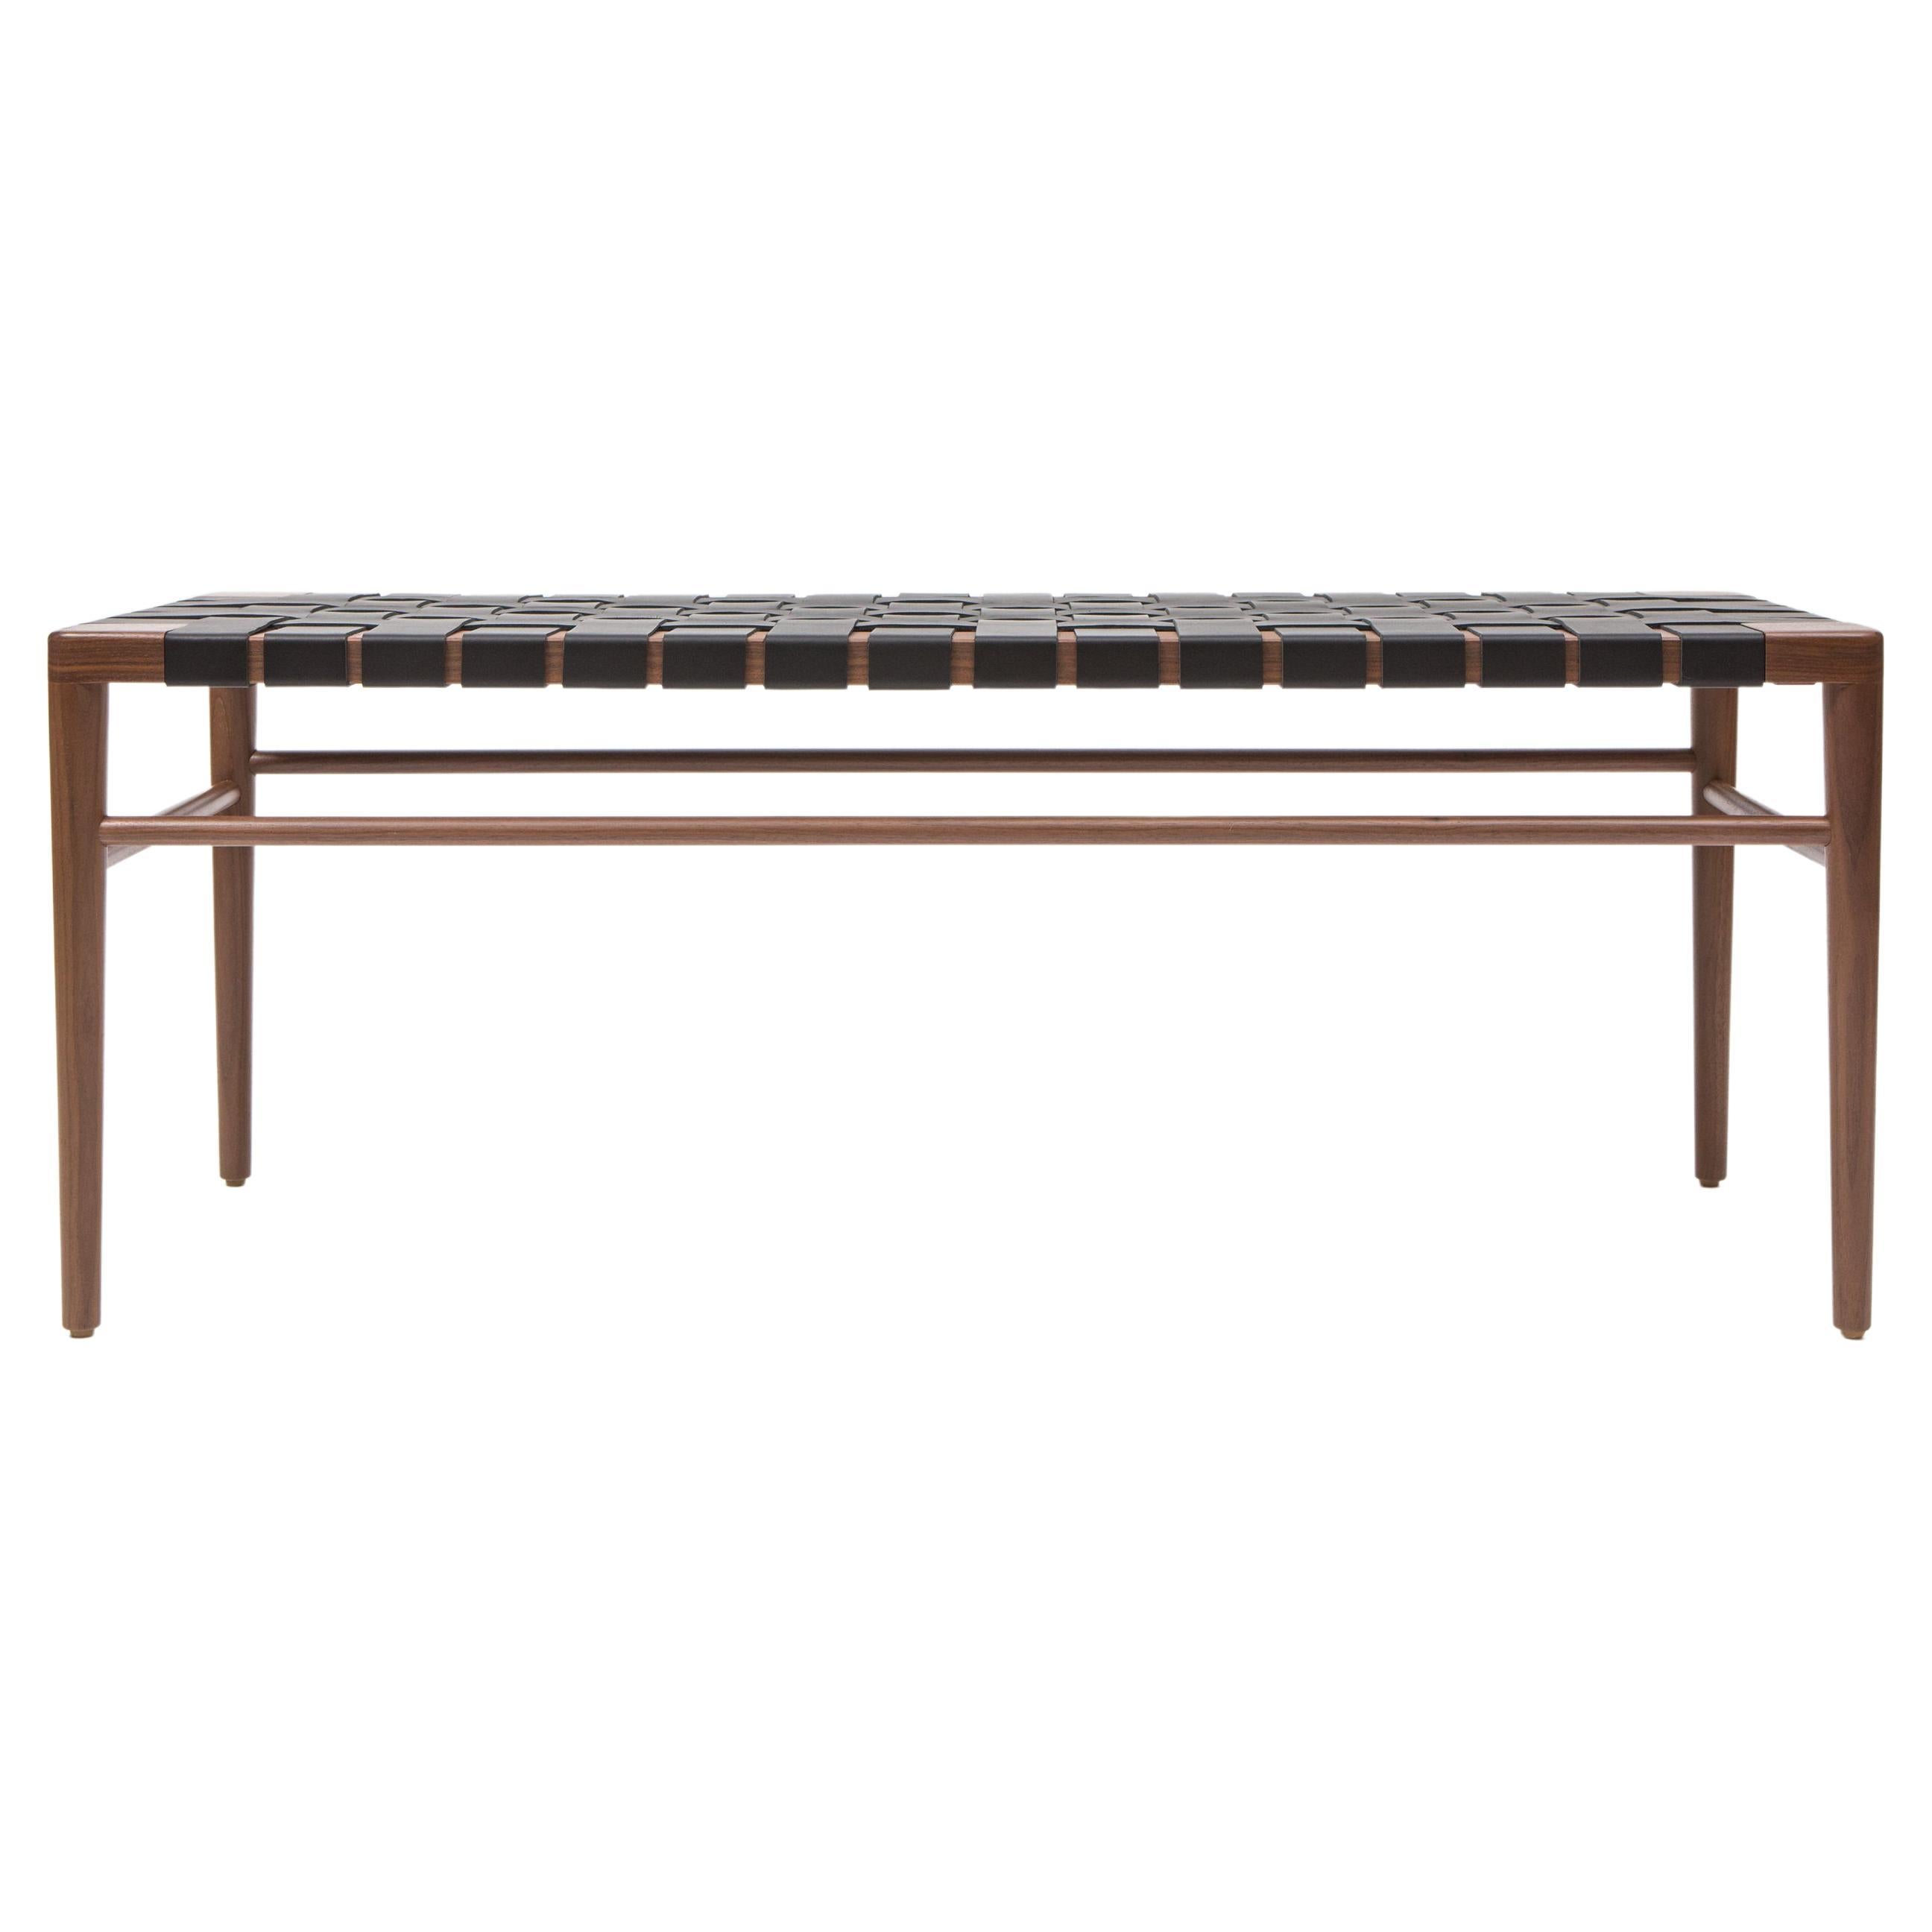 44" Woven Leather Bench in Walnut and Black Leather by Mel Smilow